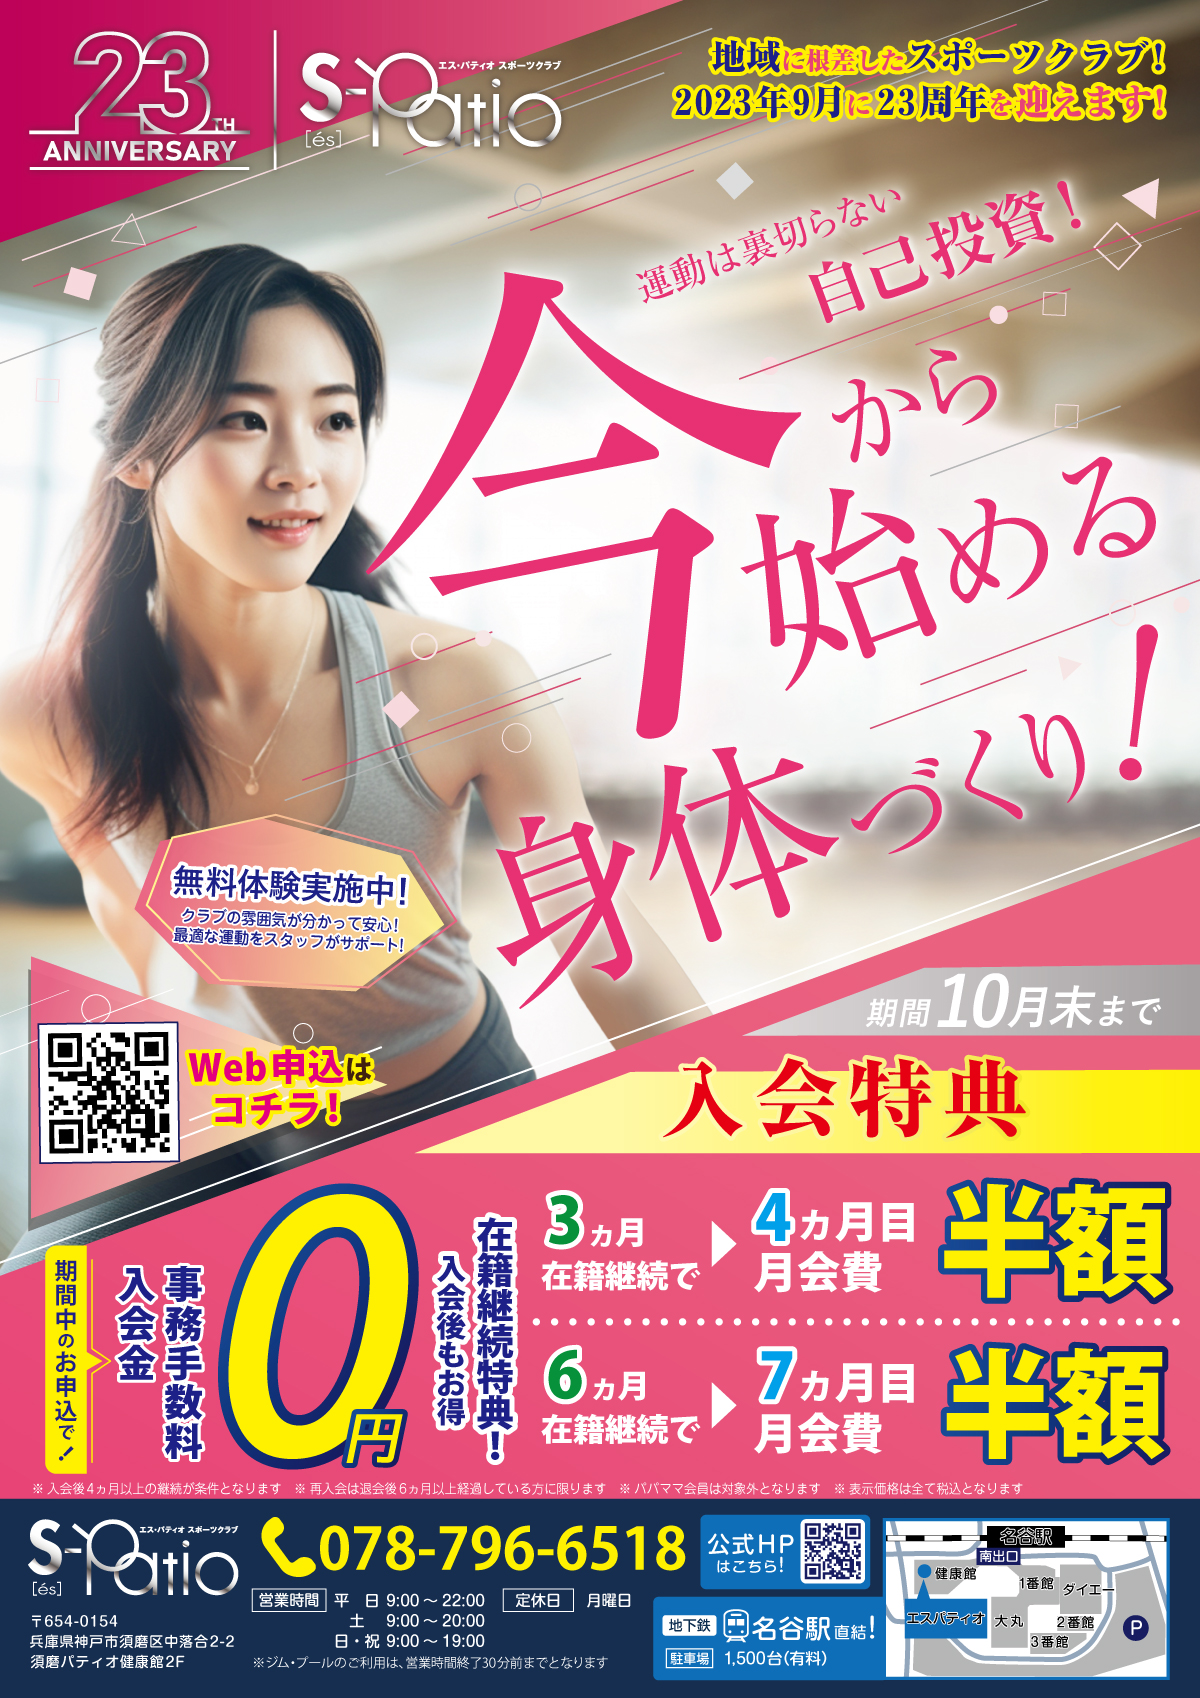 fitness_campaignのサムネイル